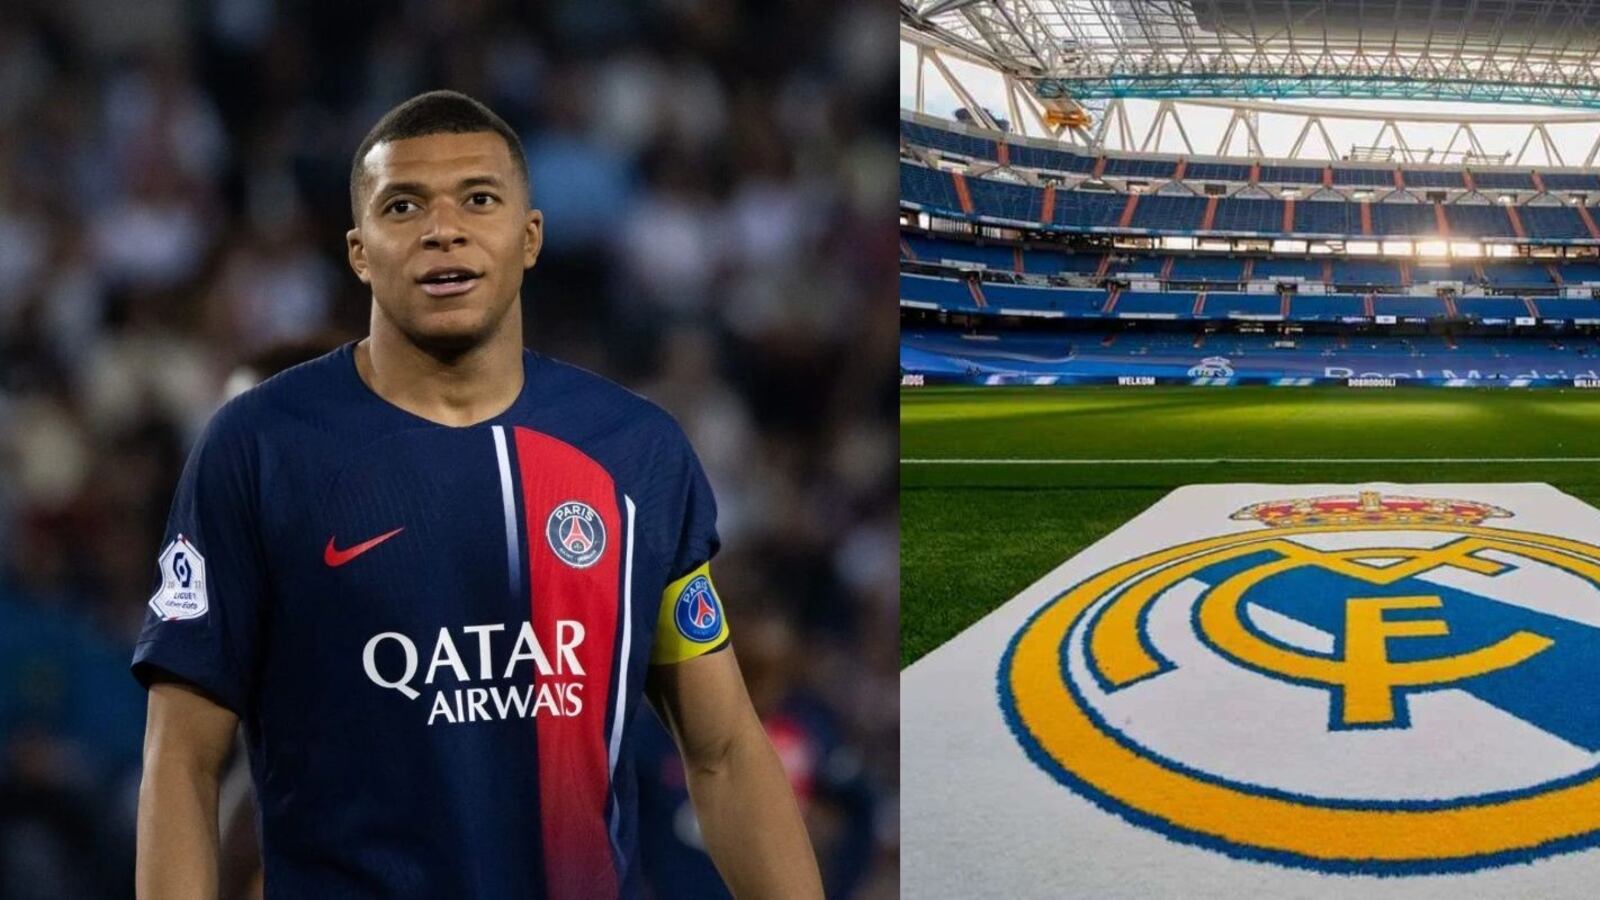 Let Mbappe learn, the 80 million striker who does dream of playing for Real Madrid